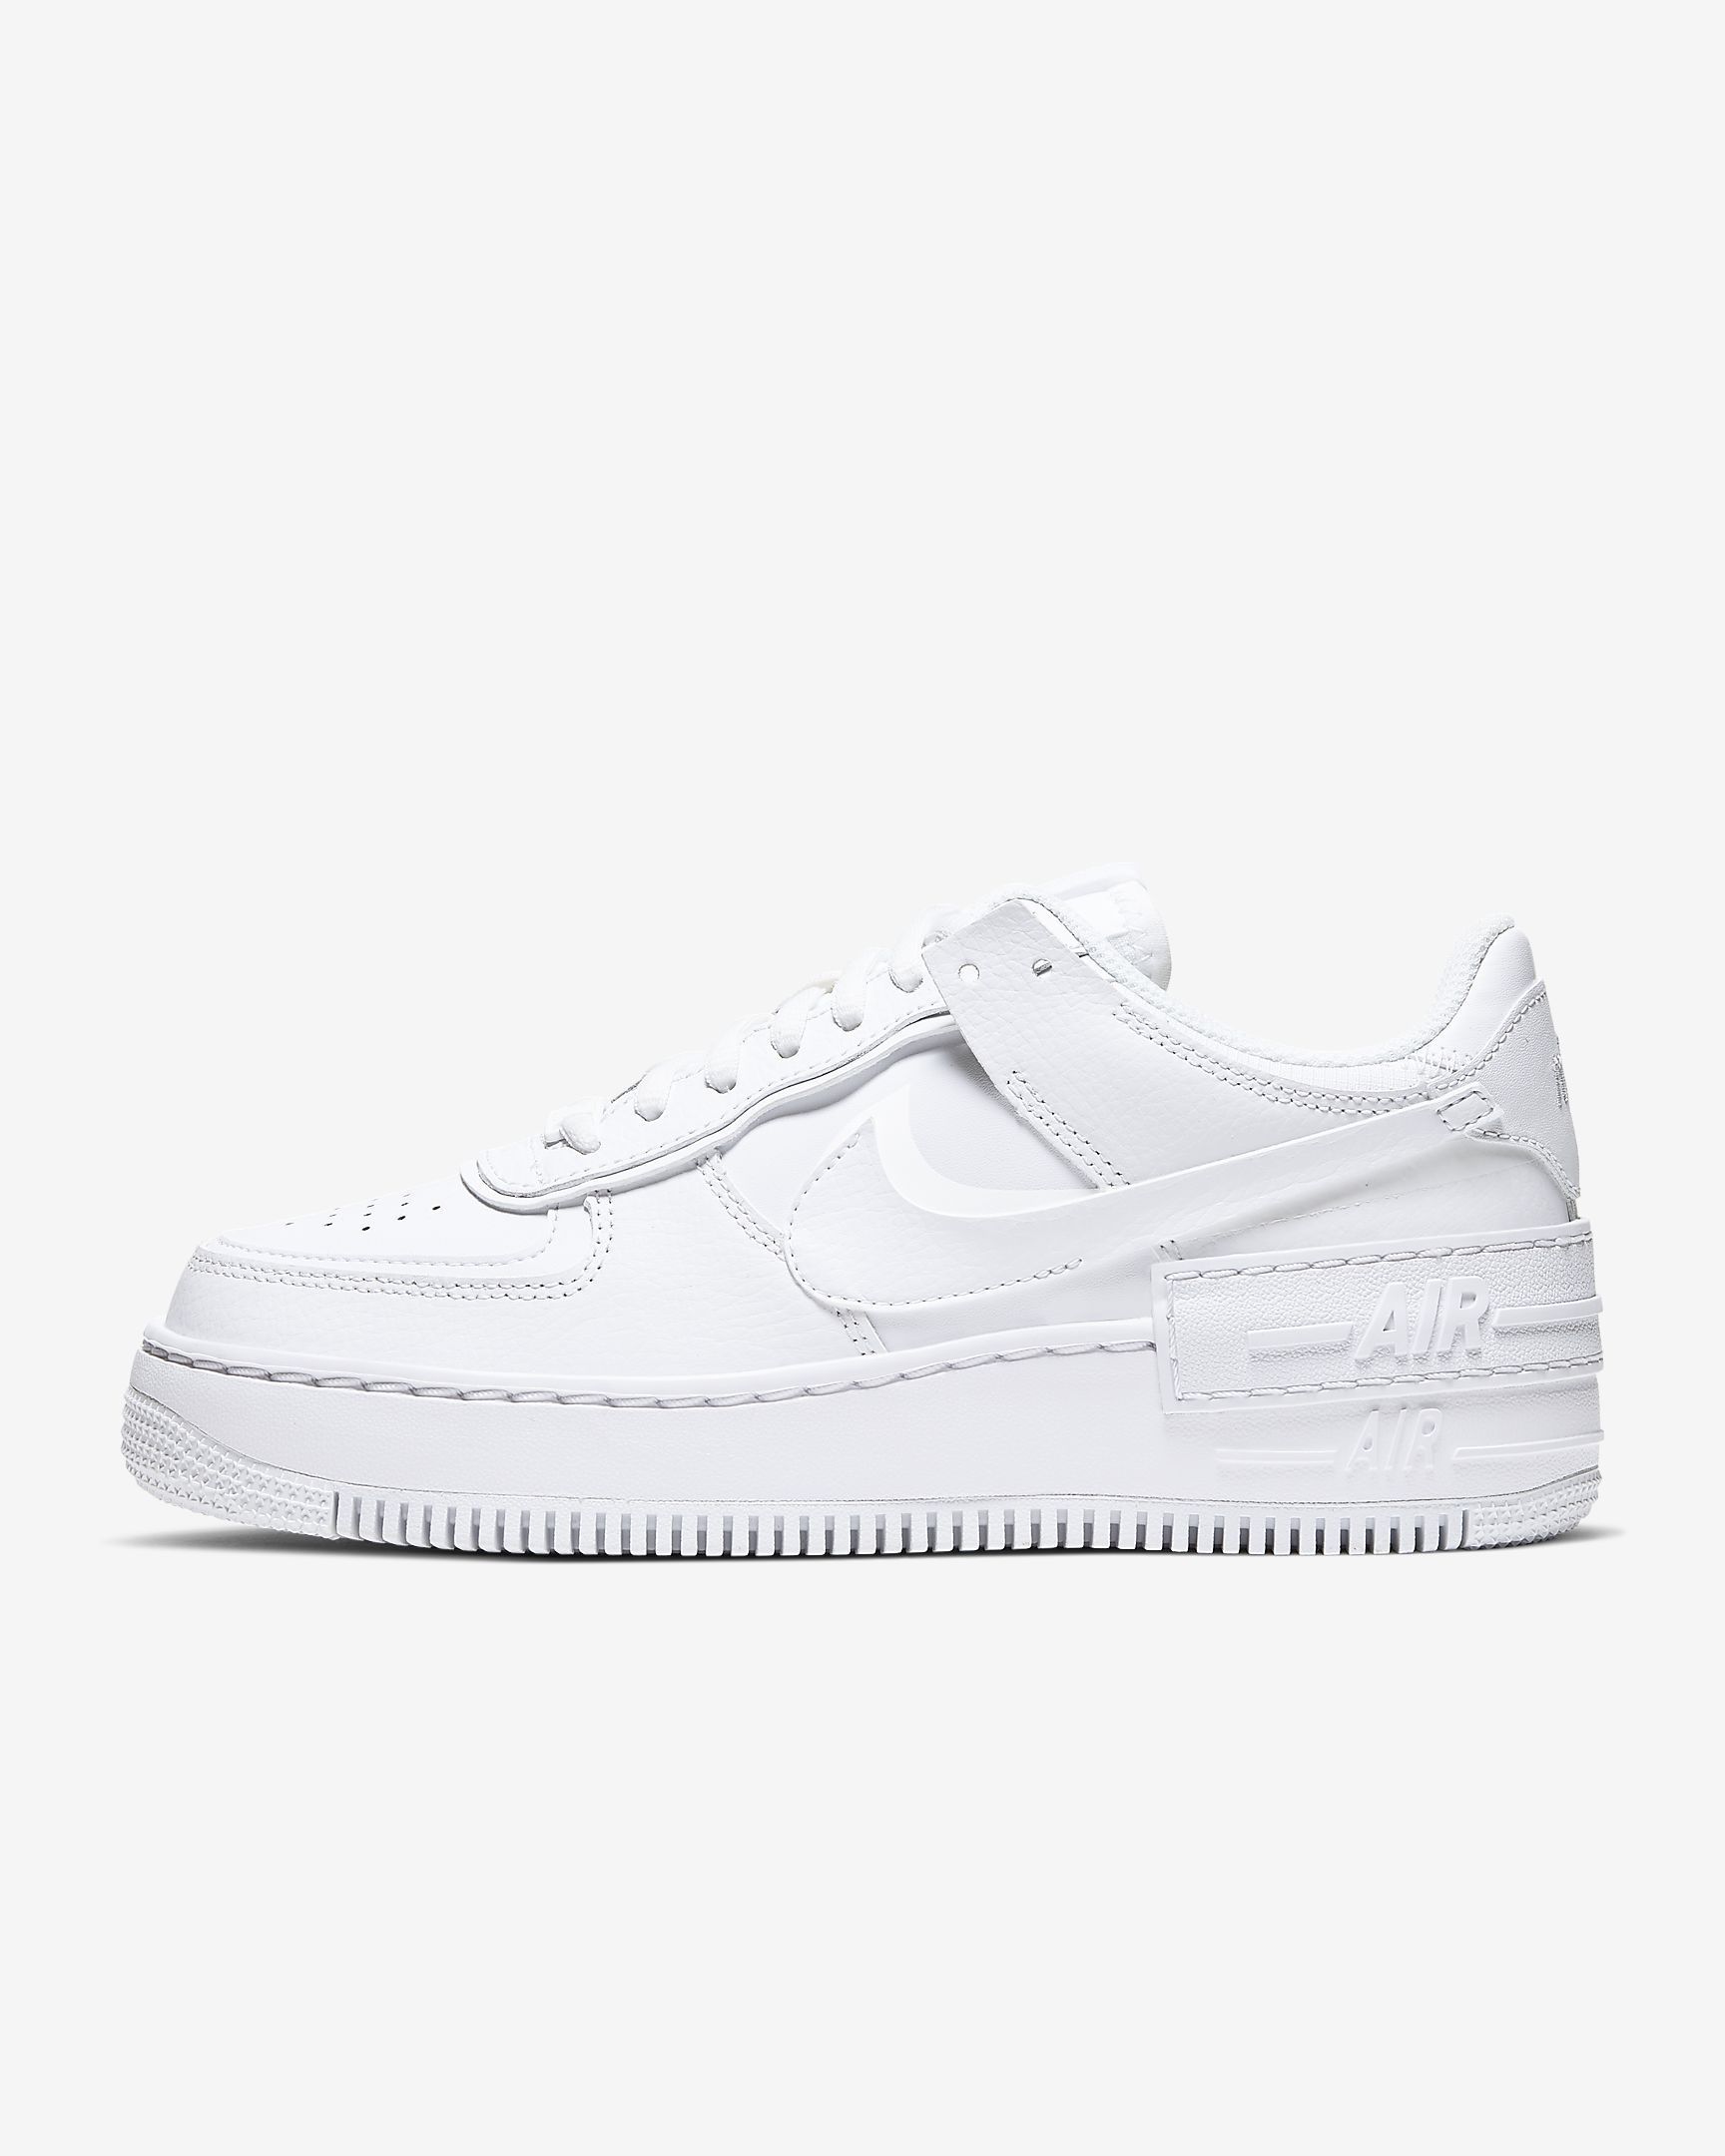 Best Nike Air Force 1 Sneakers to Shop 